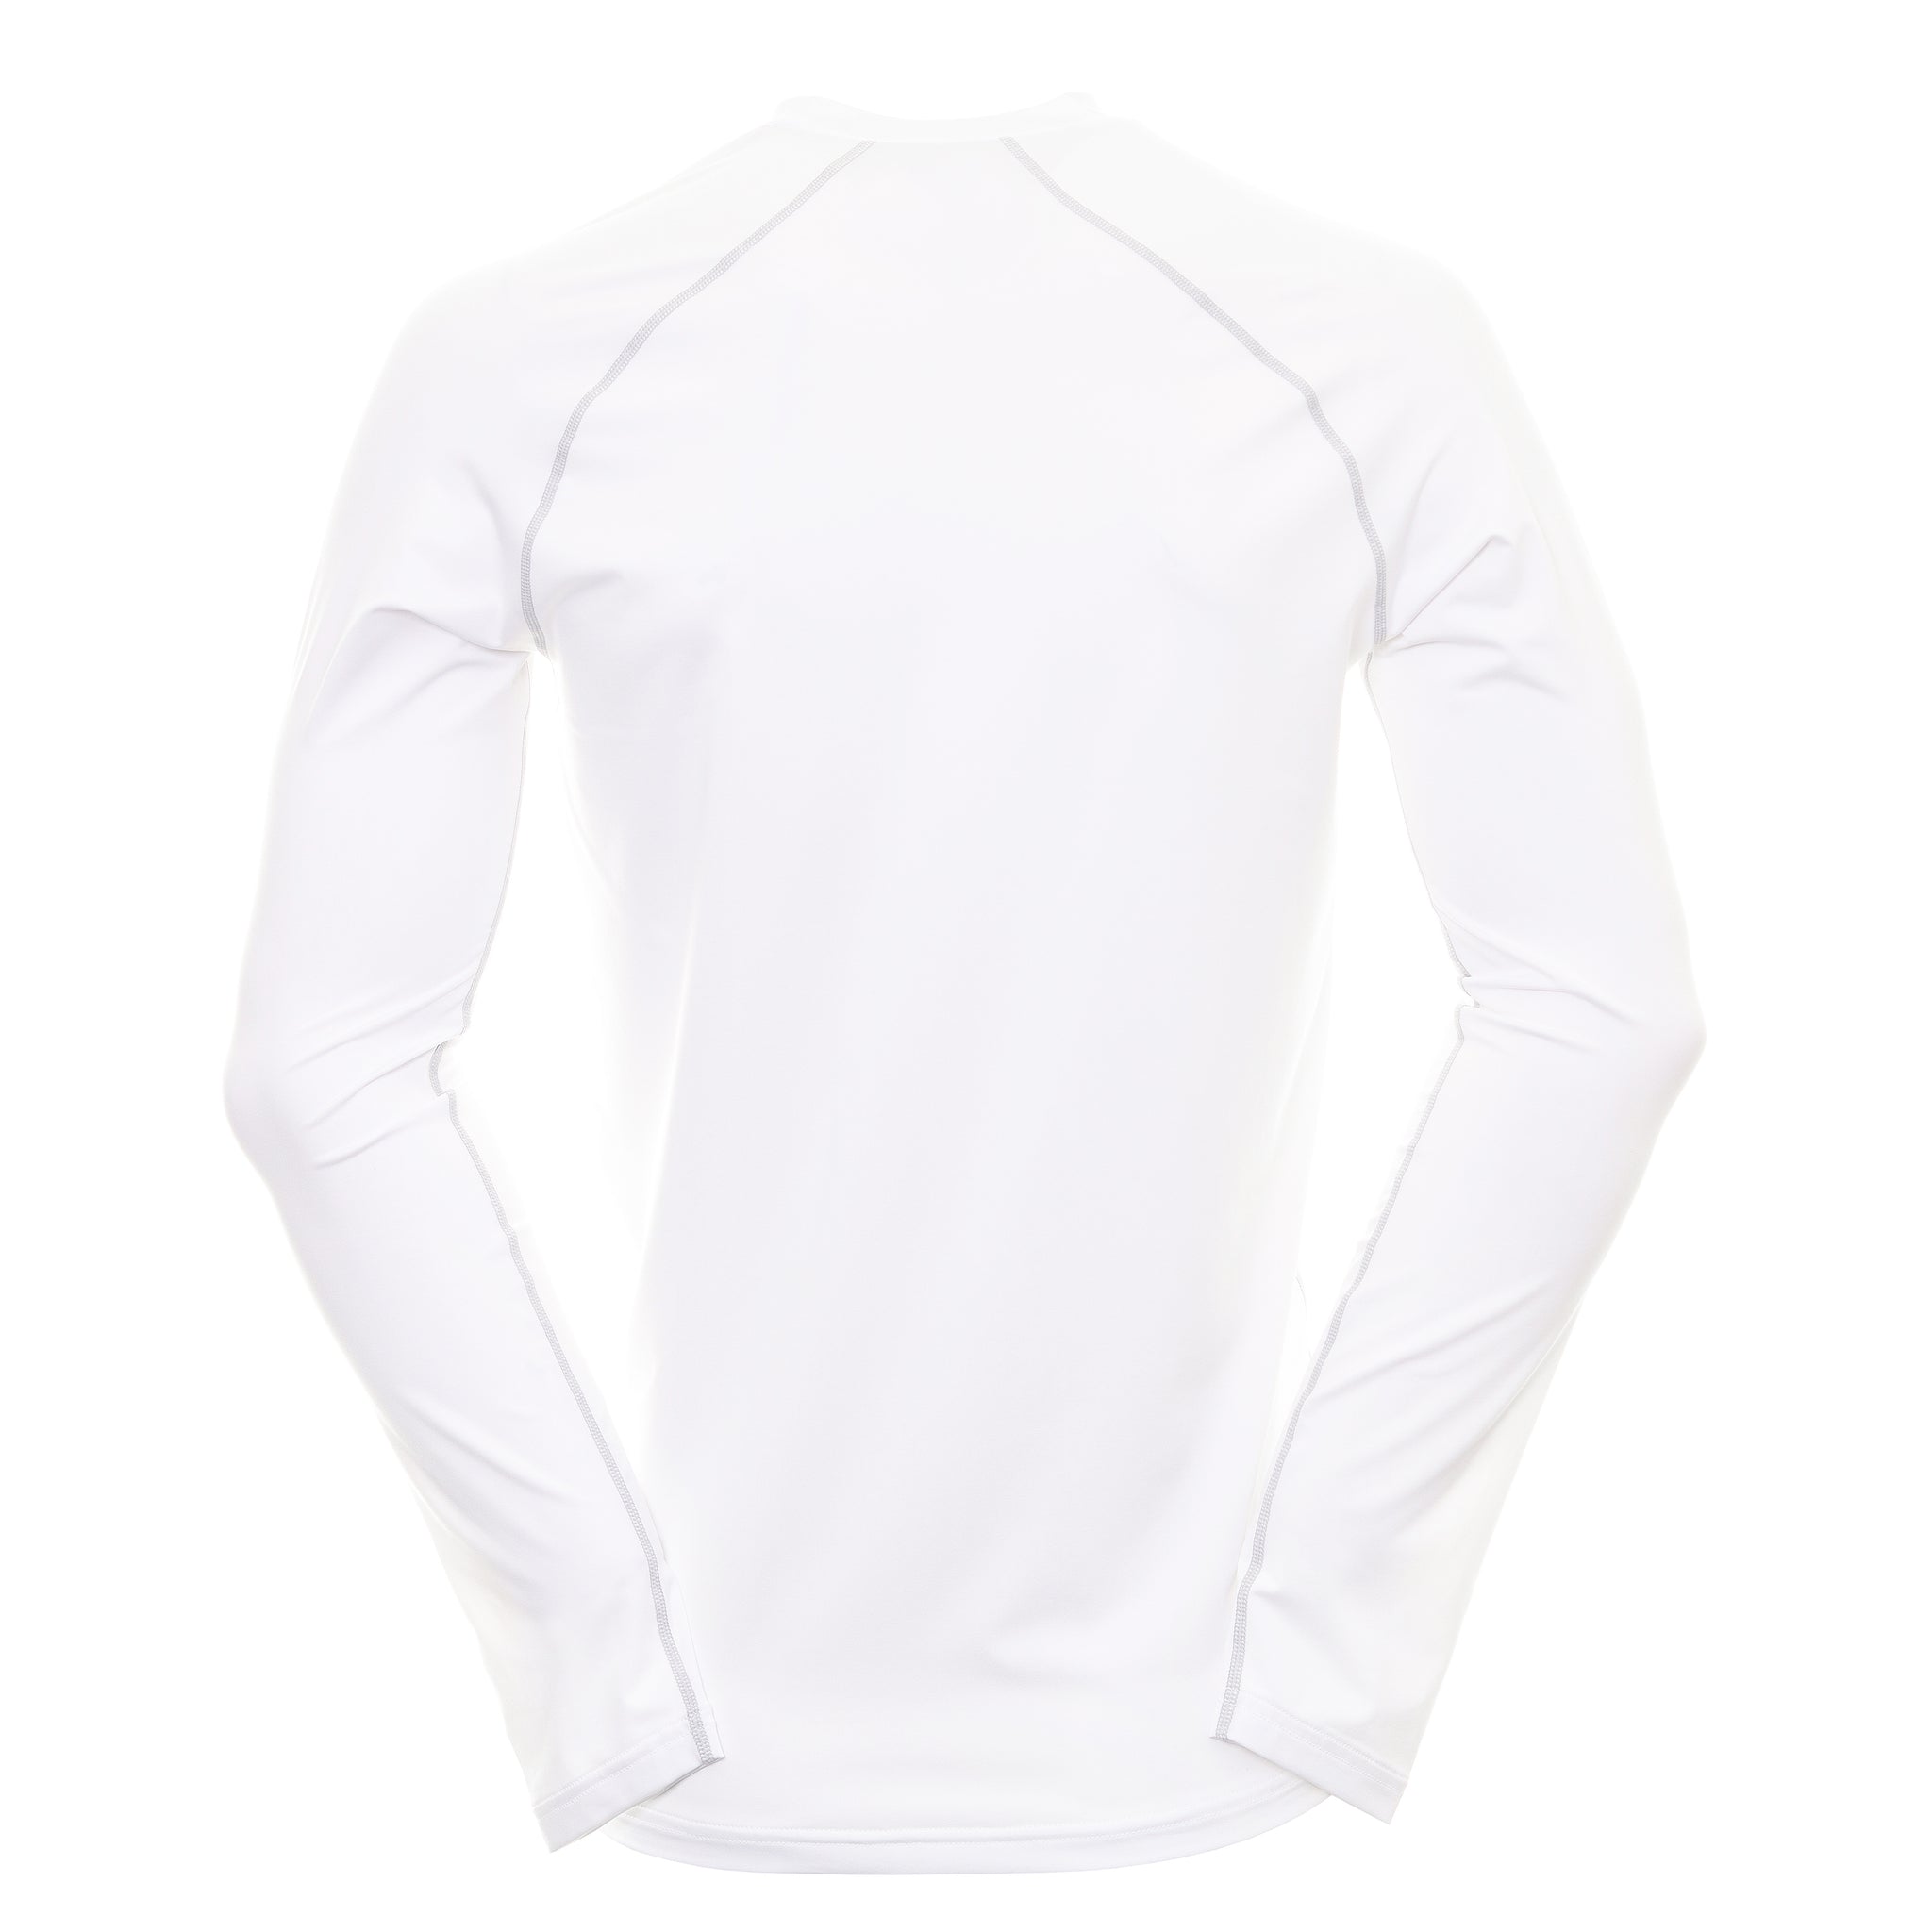 Galvin Green Enzo Base Layer White Cool Grey 9235 | Function18 ...